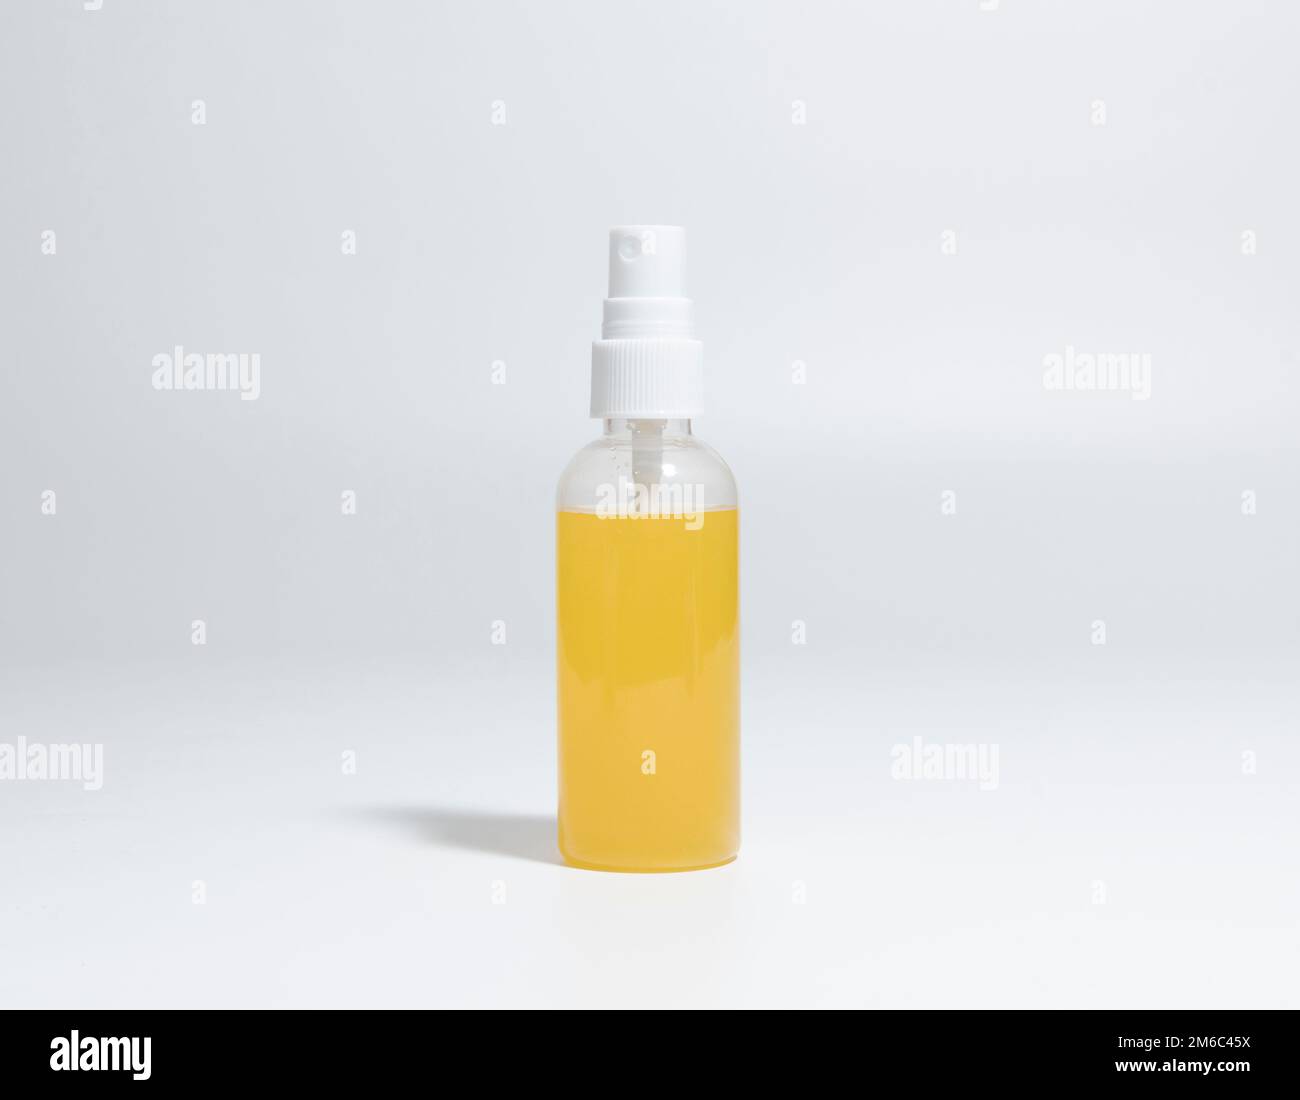 Spray Bottle with yellow liquid. close-up Stock Photo